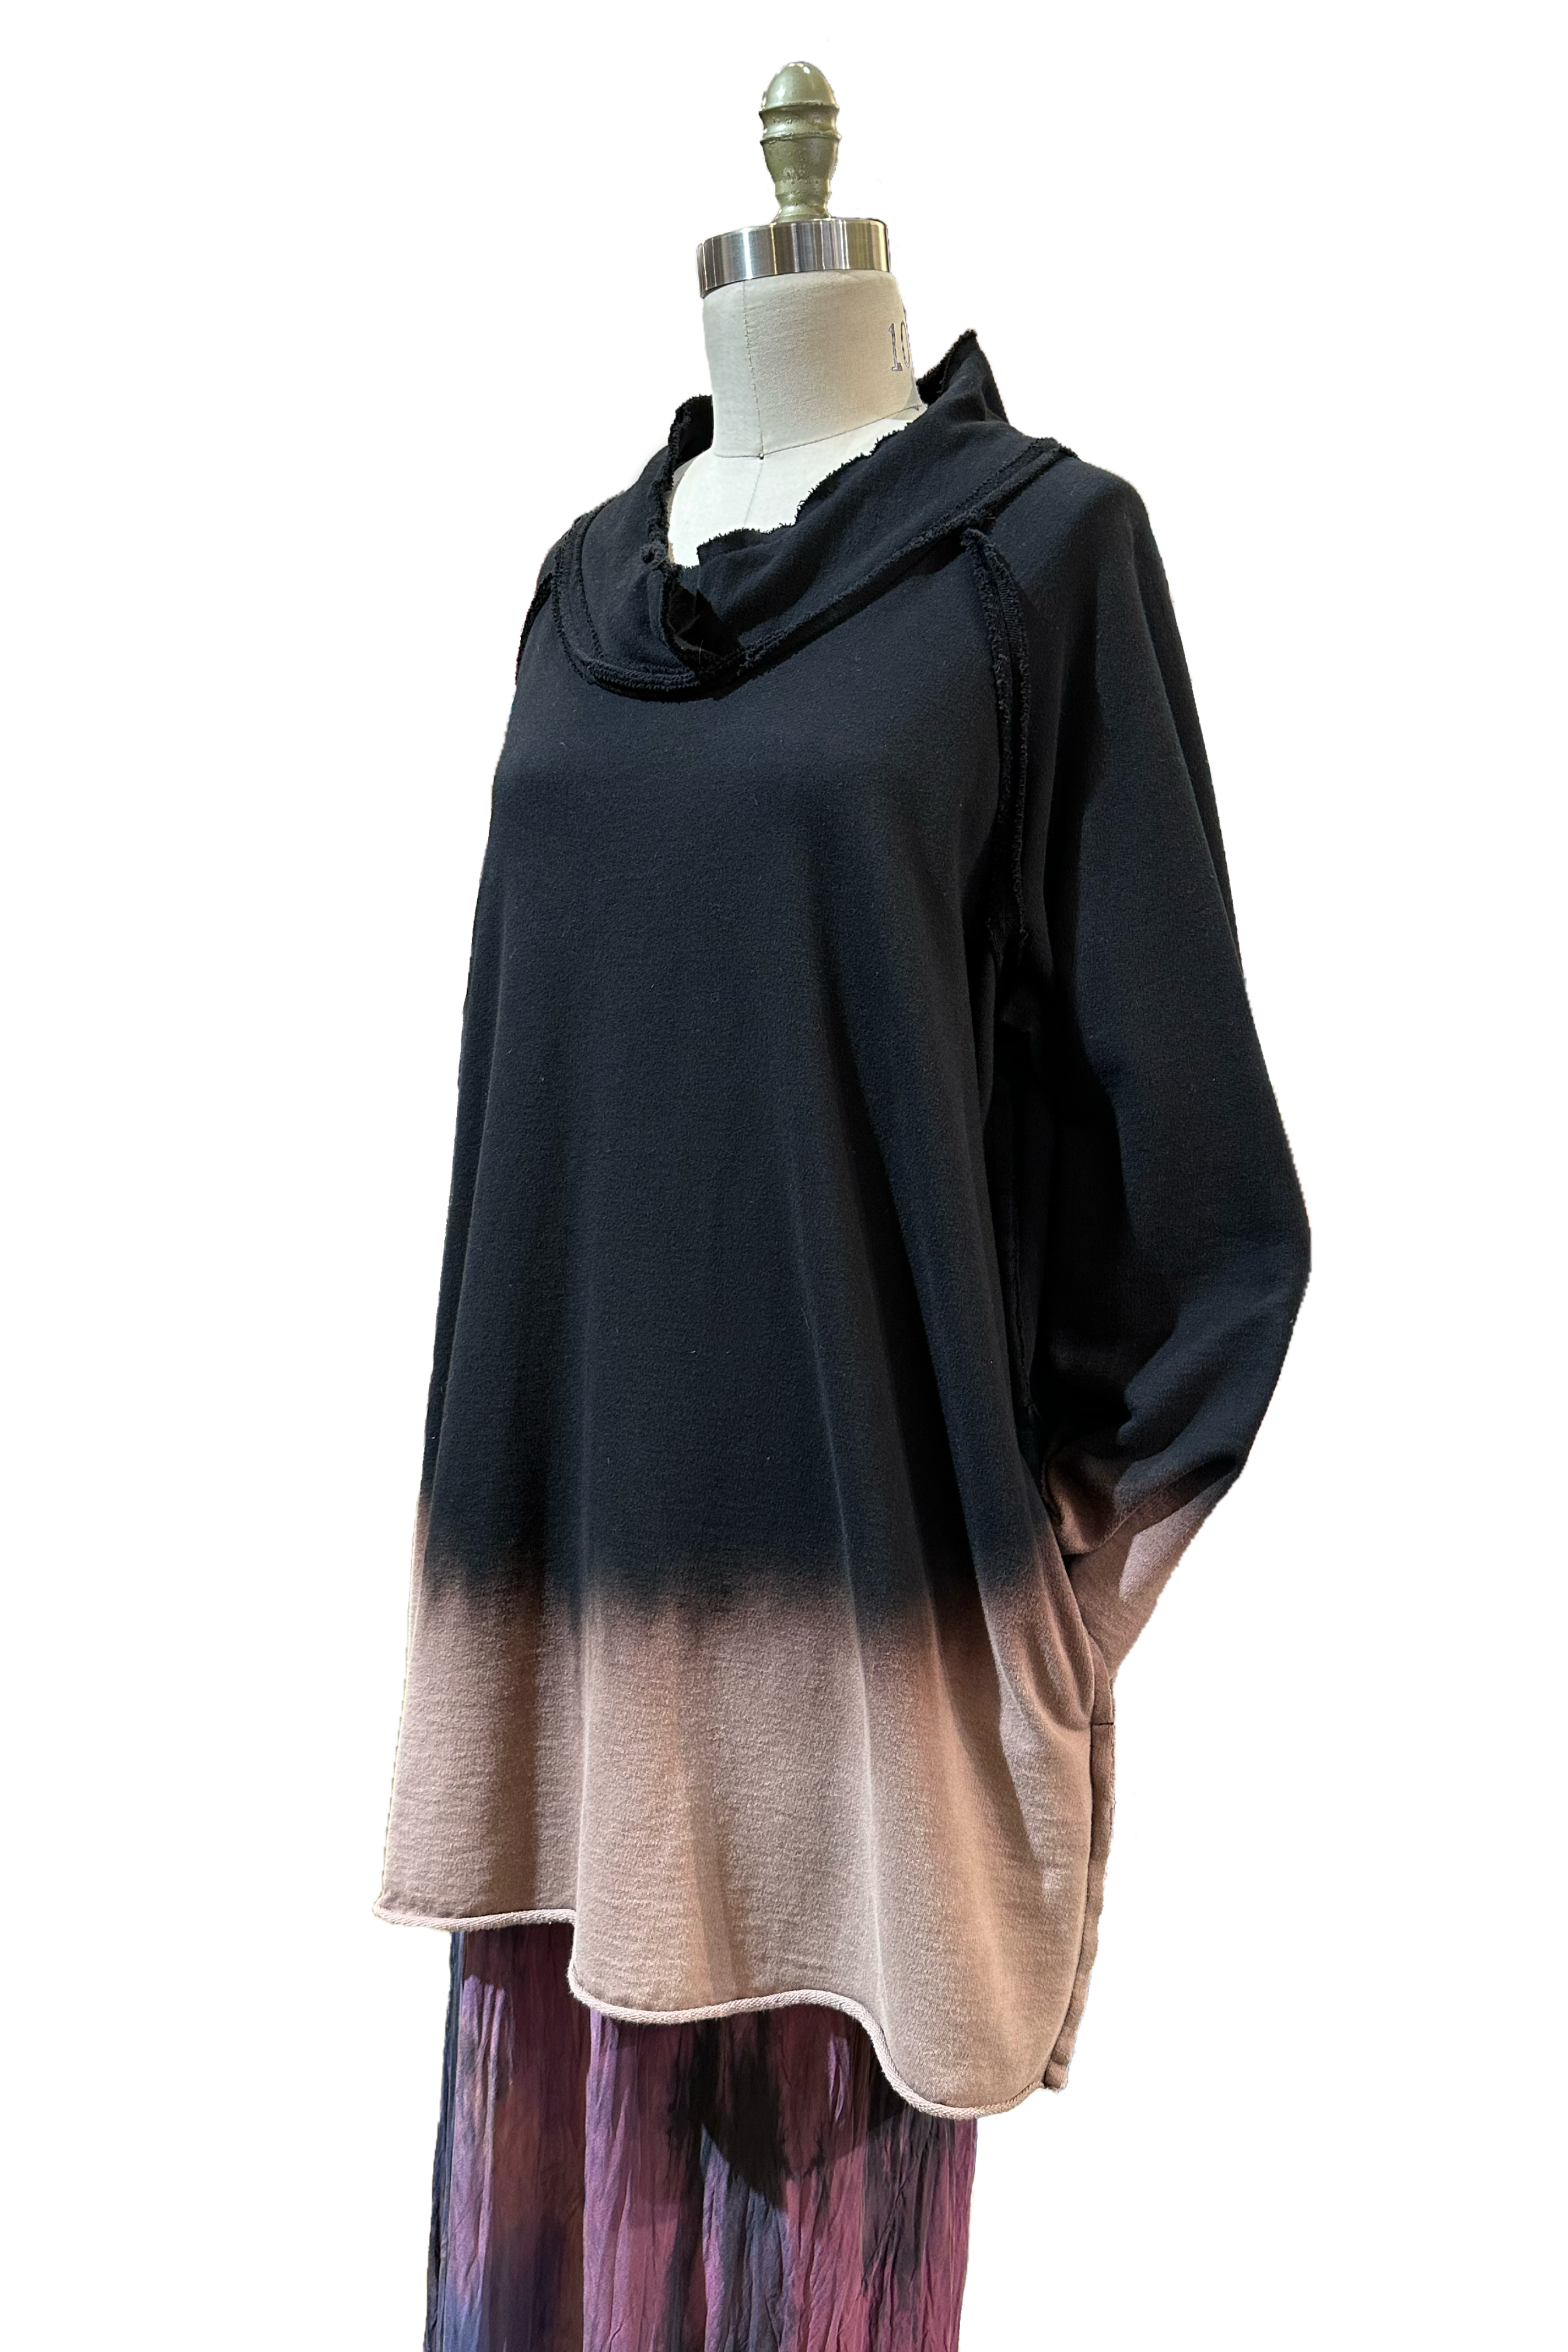 Alquimie Funnel Neck Oversized Sweater in Black & Natural Ombre